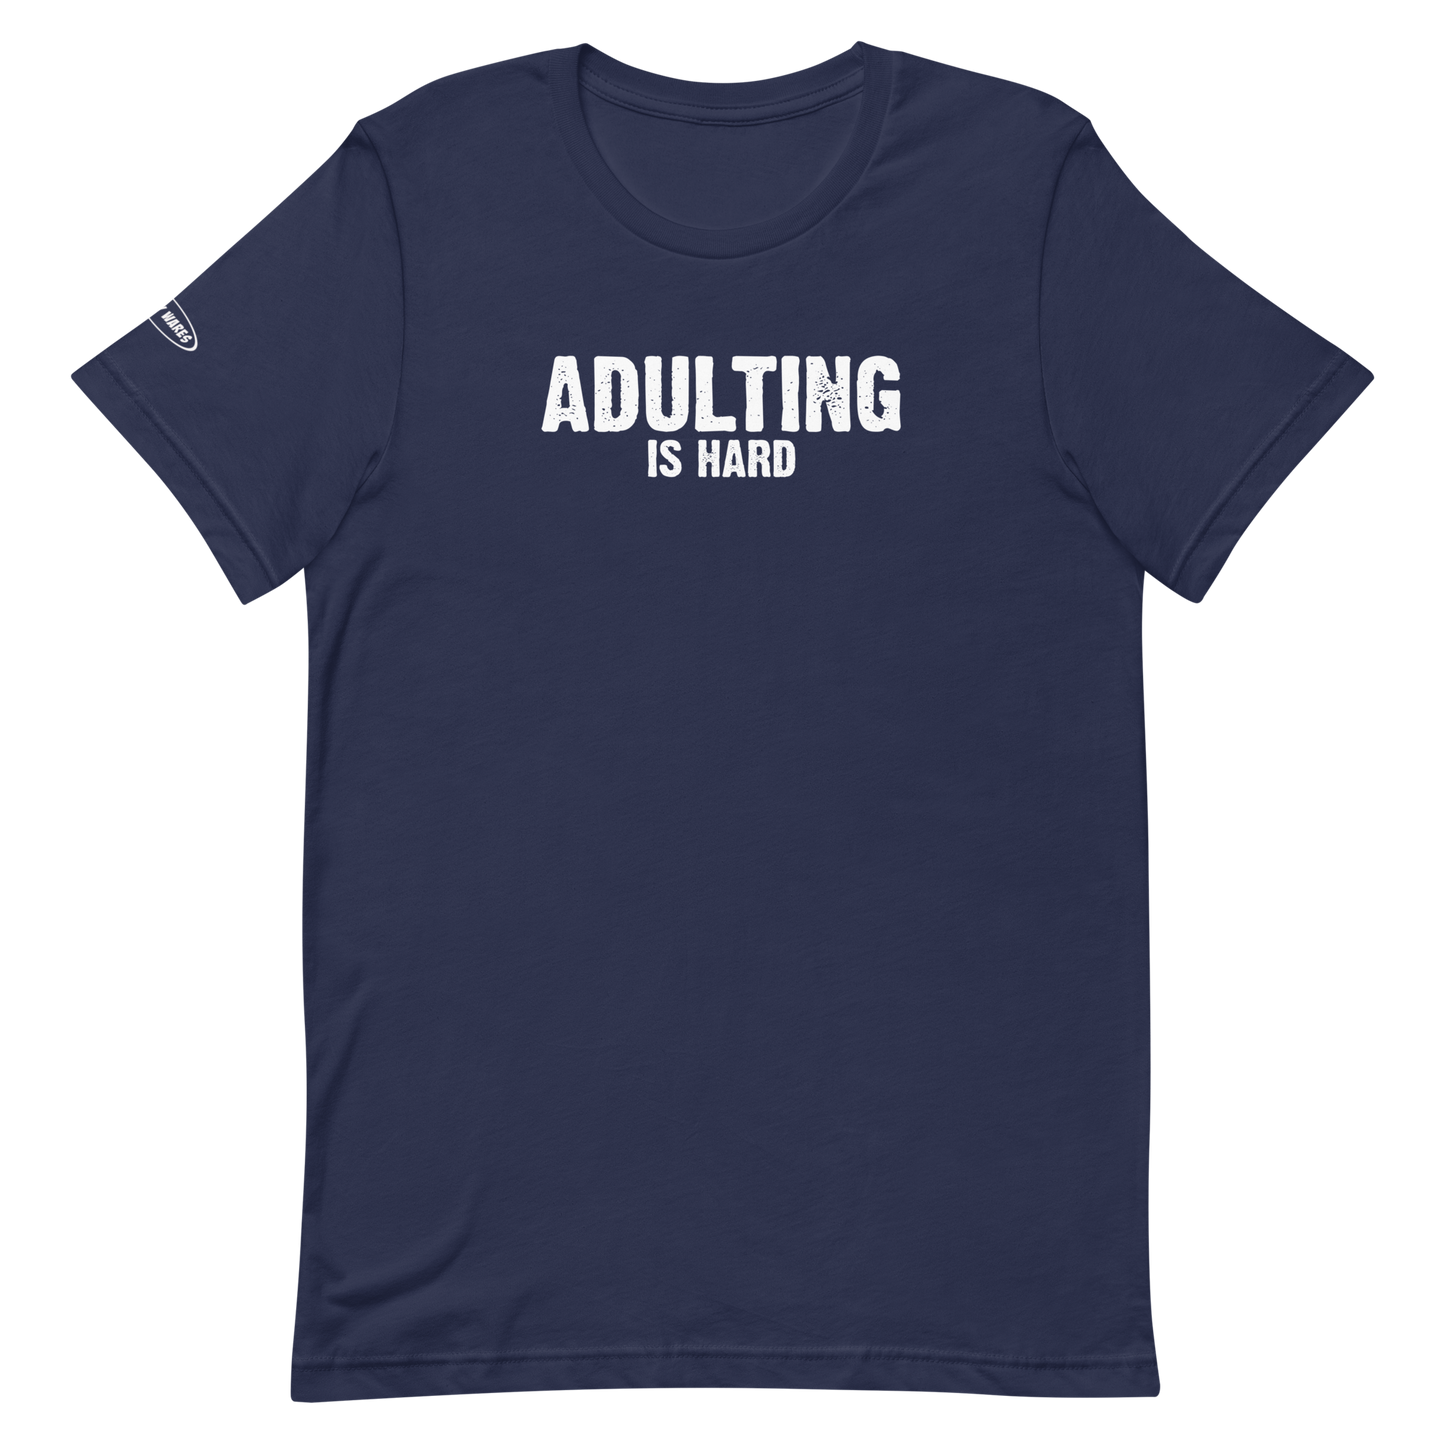 Unisex - Adulting Is Hard - Funny T-Shirt